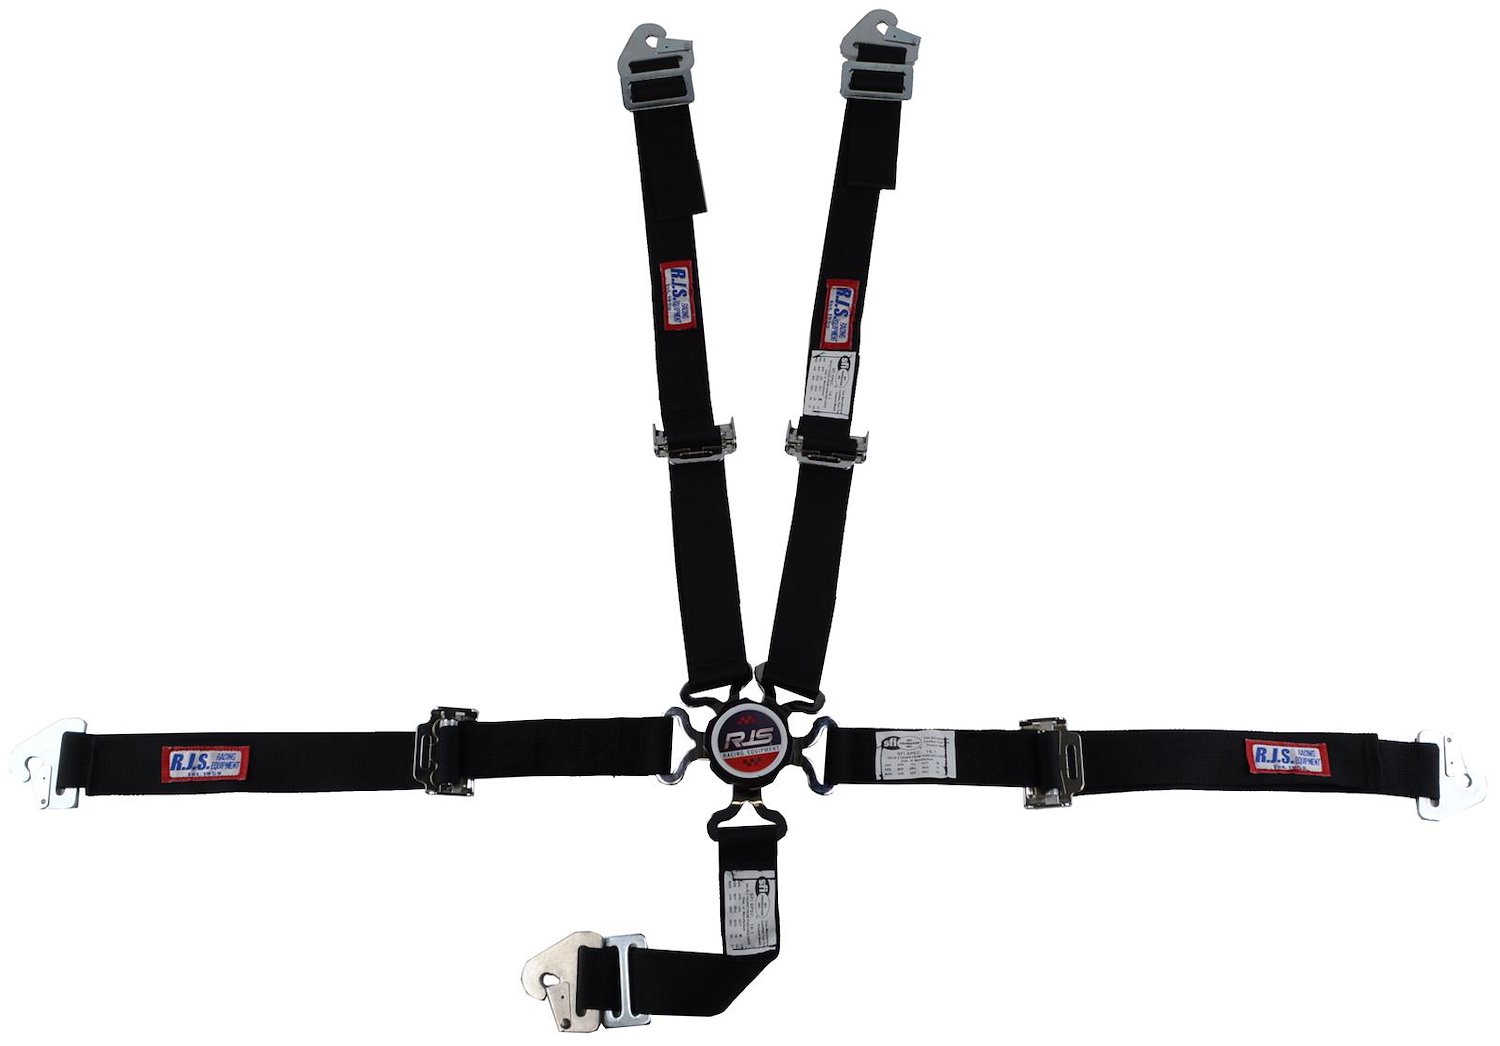 SFI 16.1 CAM-LOCK HARNESS 2 PULL UP Lap Belt 2 Shoulder Harness Individual ROLL BAR Mount 2 DOUBLE Sub ALL WRAP ENDS GRAY